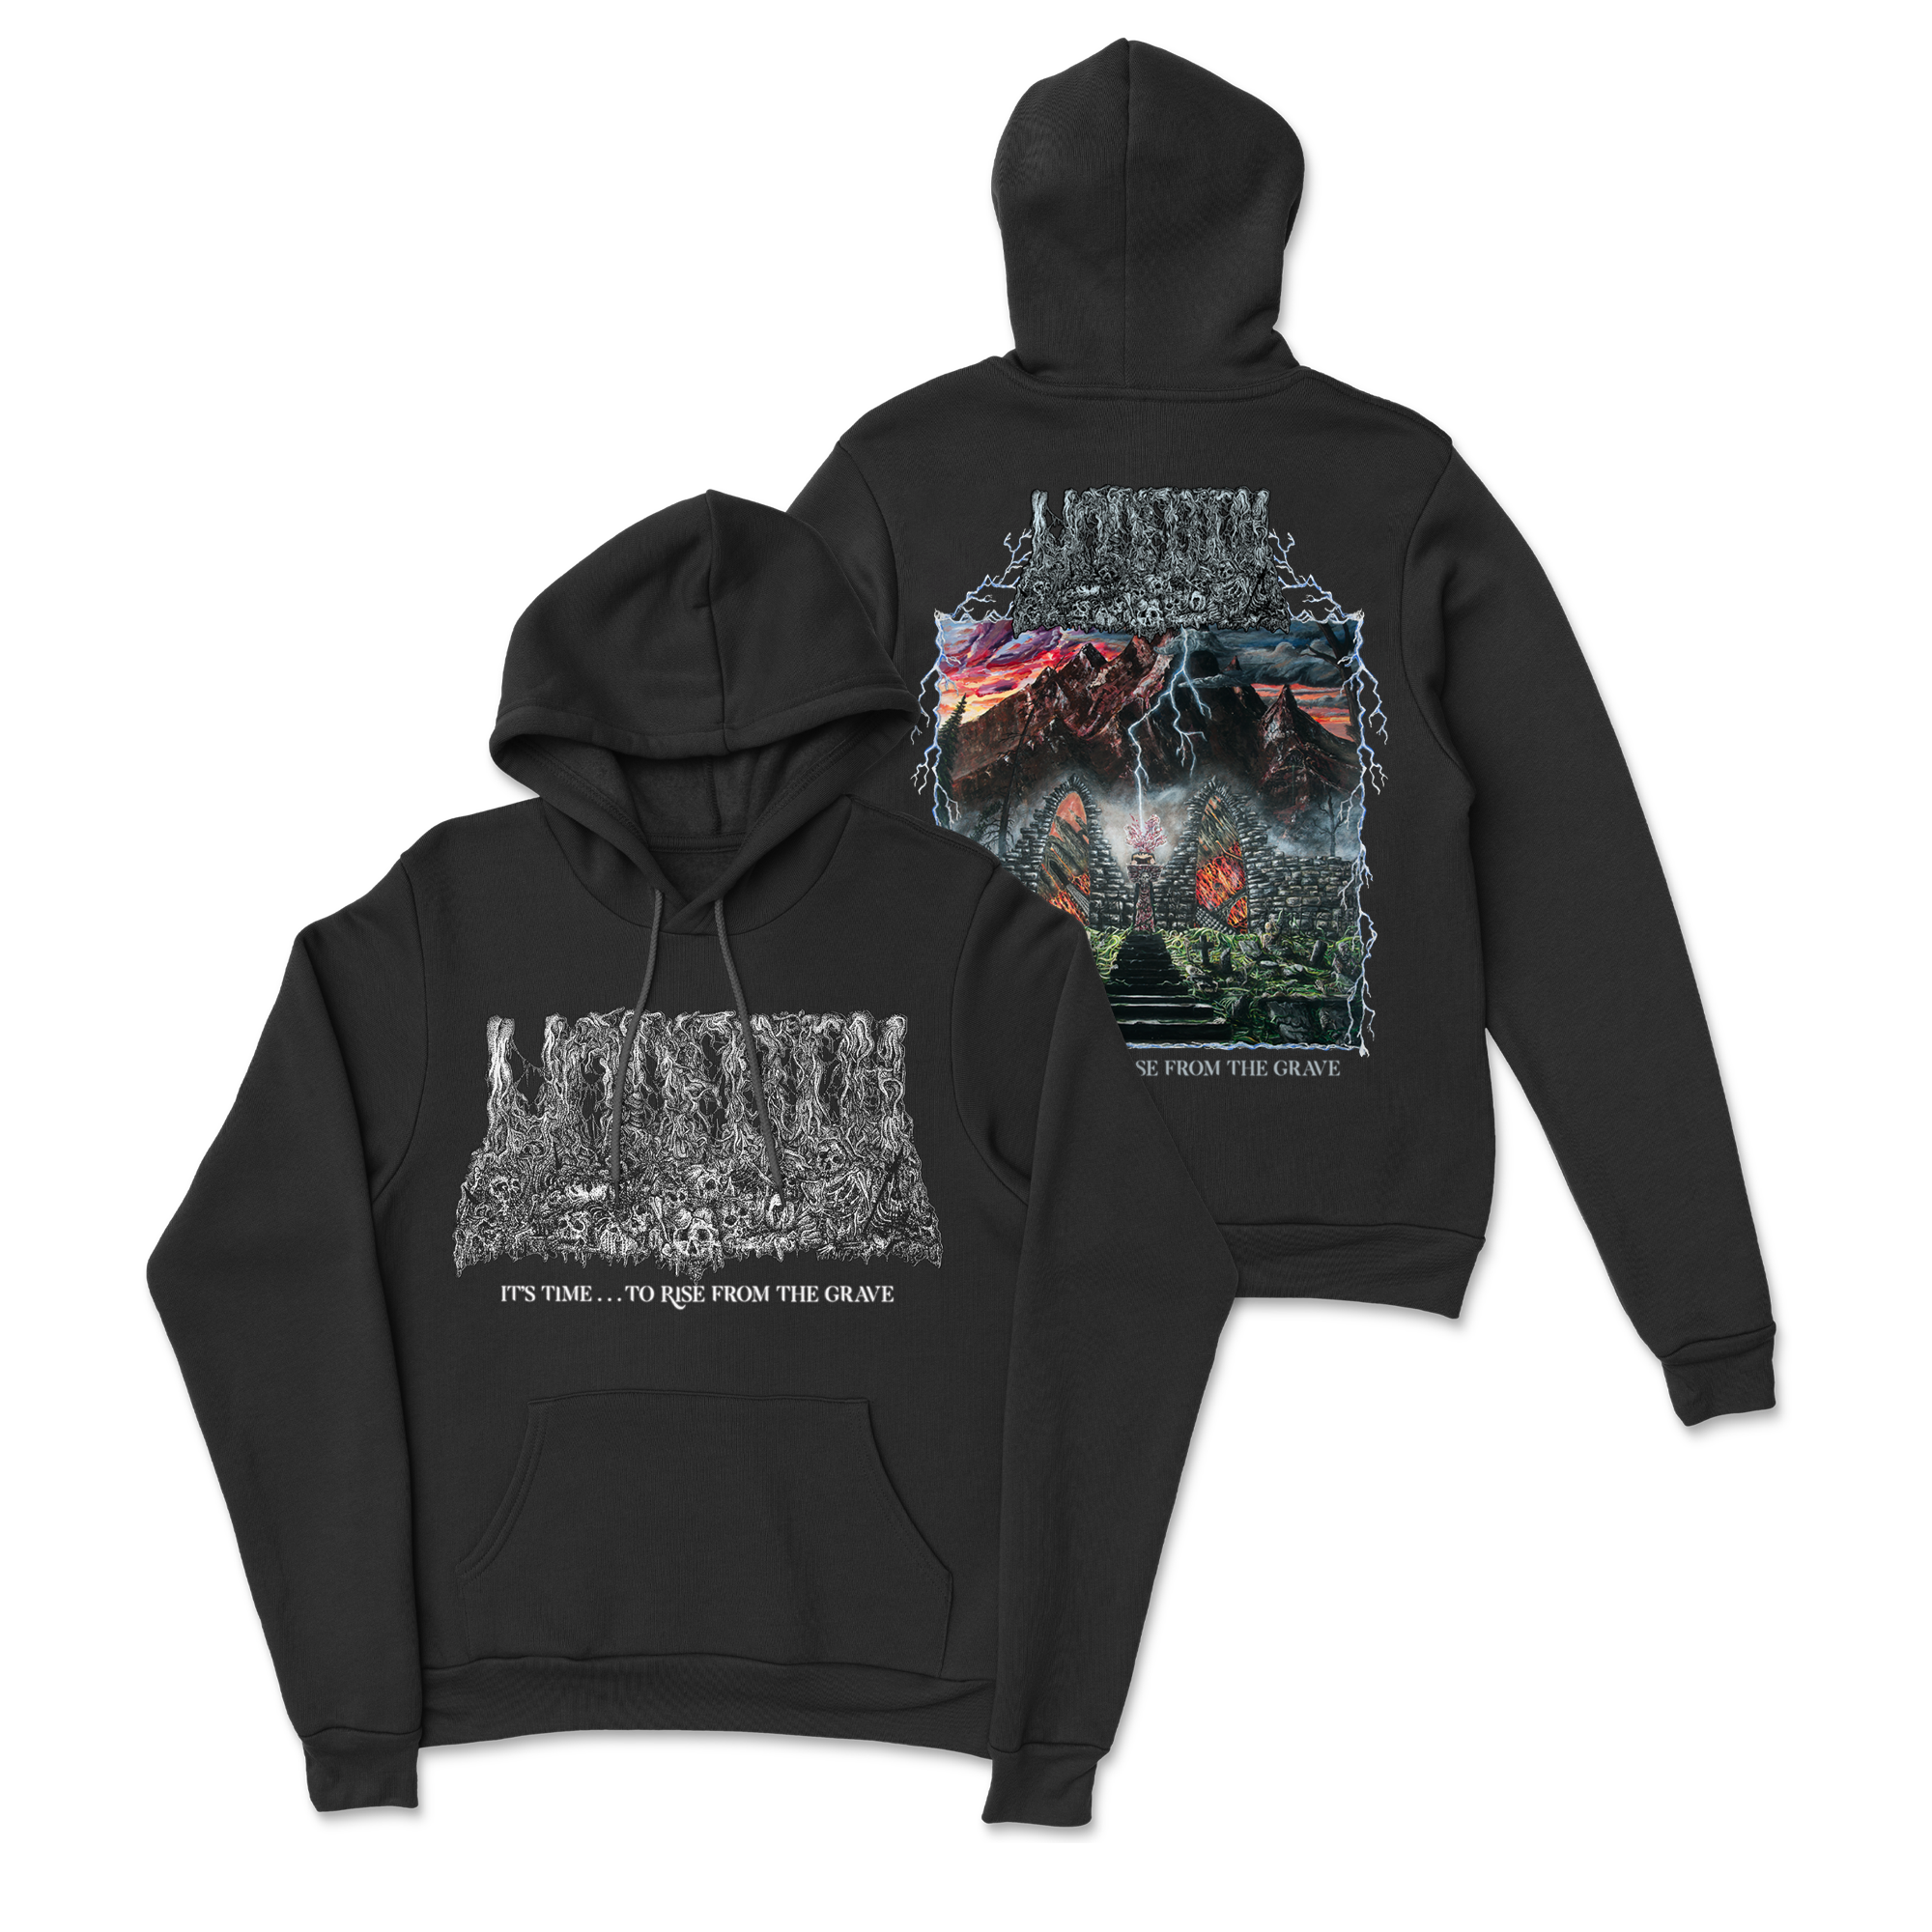 It's Time...To Rise From the Grave Hoodie